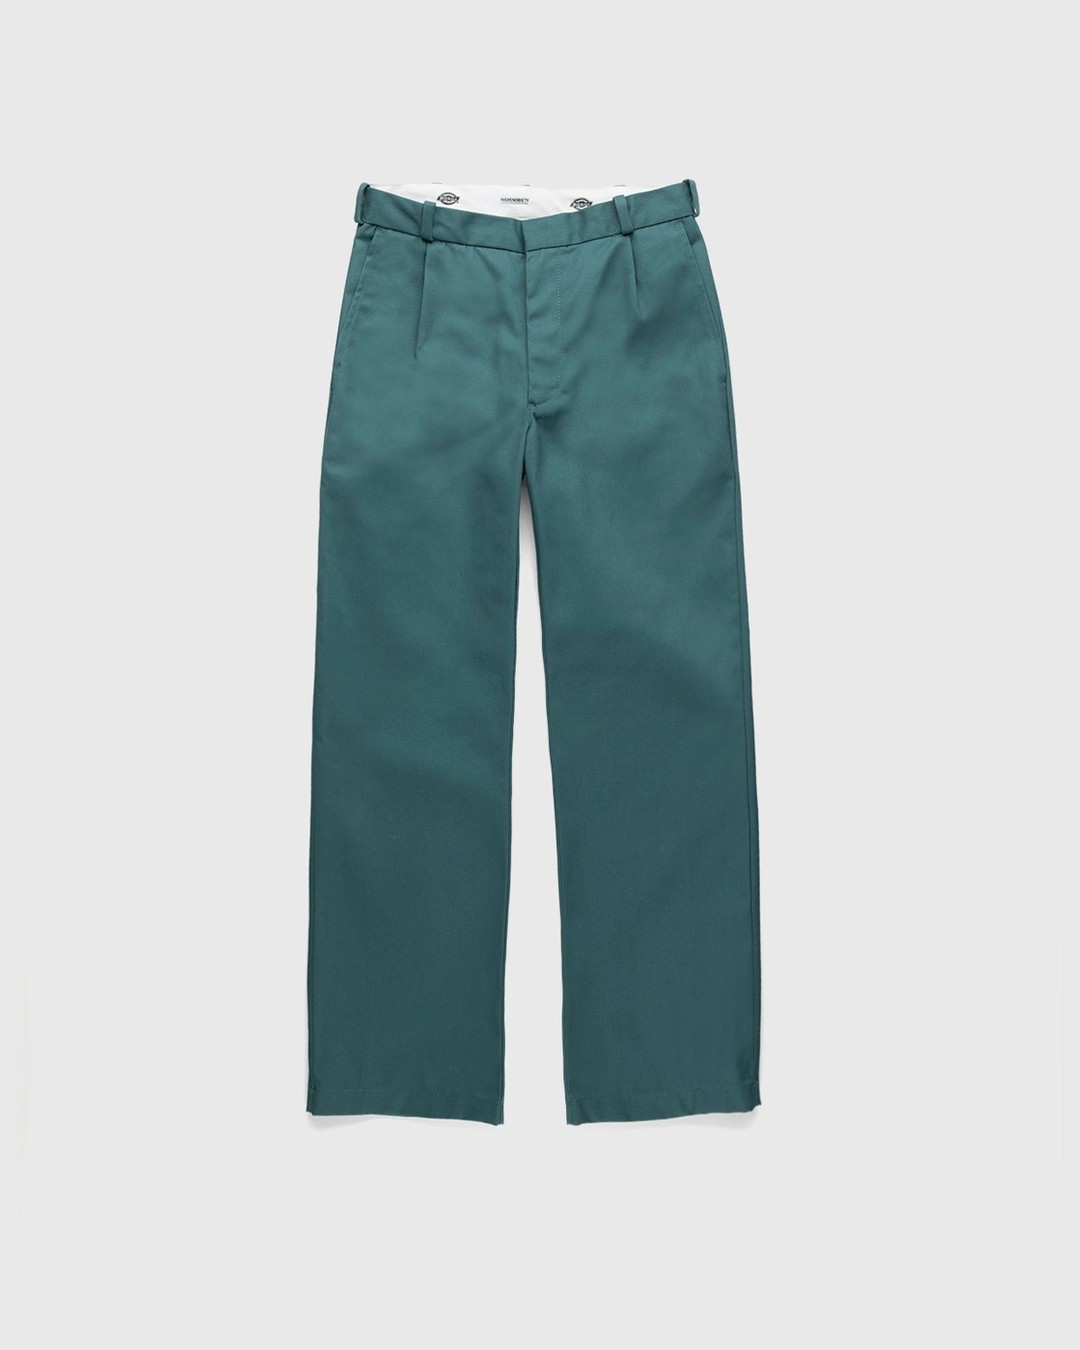 Highsnobiety x Dickies – Pleated Work Pants Lincoln Green - Pants - Green - Image 1